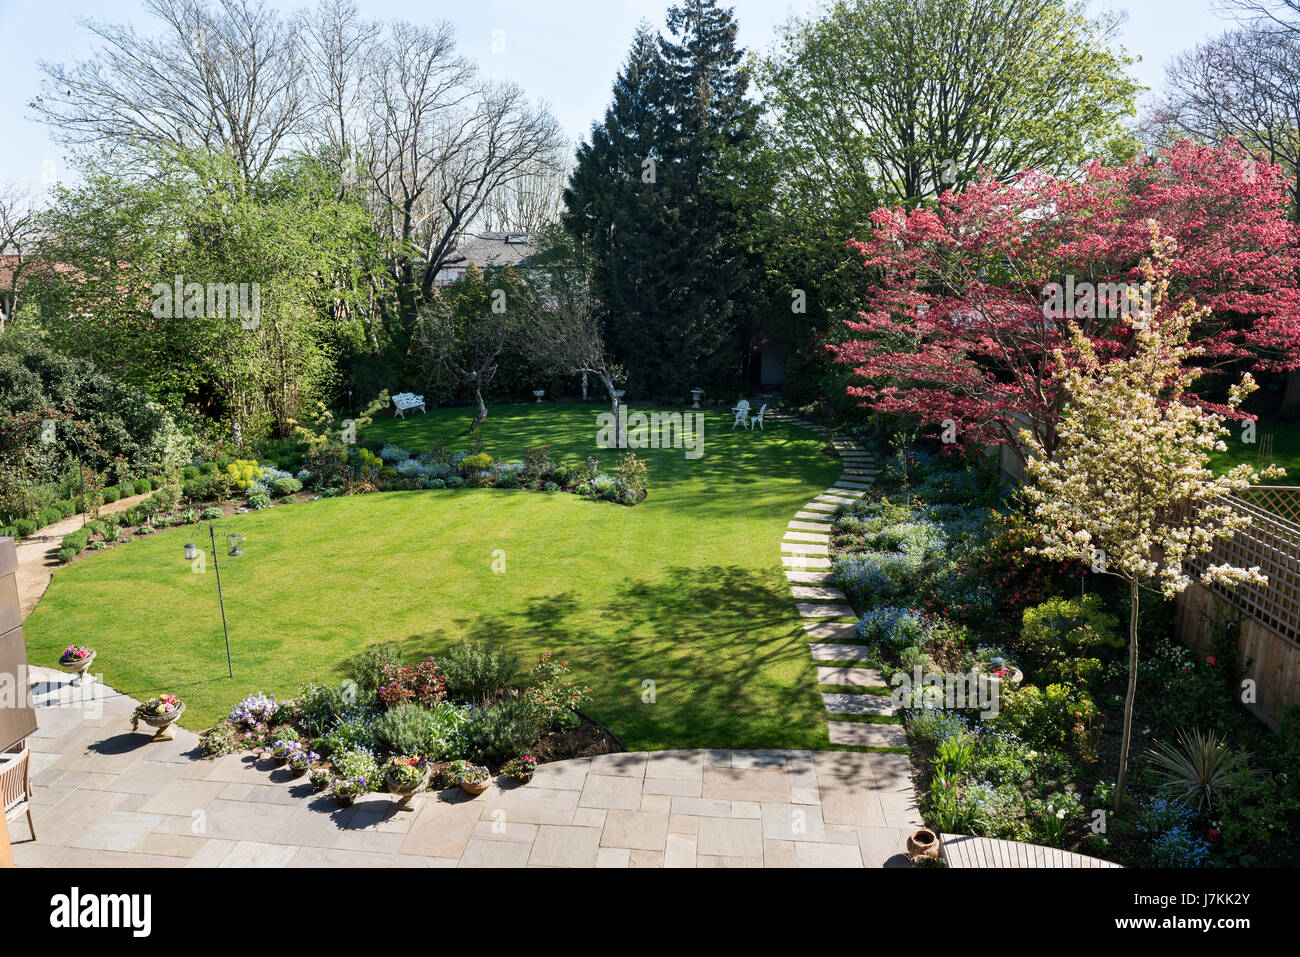 Suburban garden with paved walkway, lawn and assorted planting schemes. Stock Photo